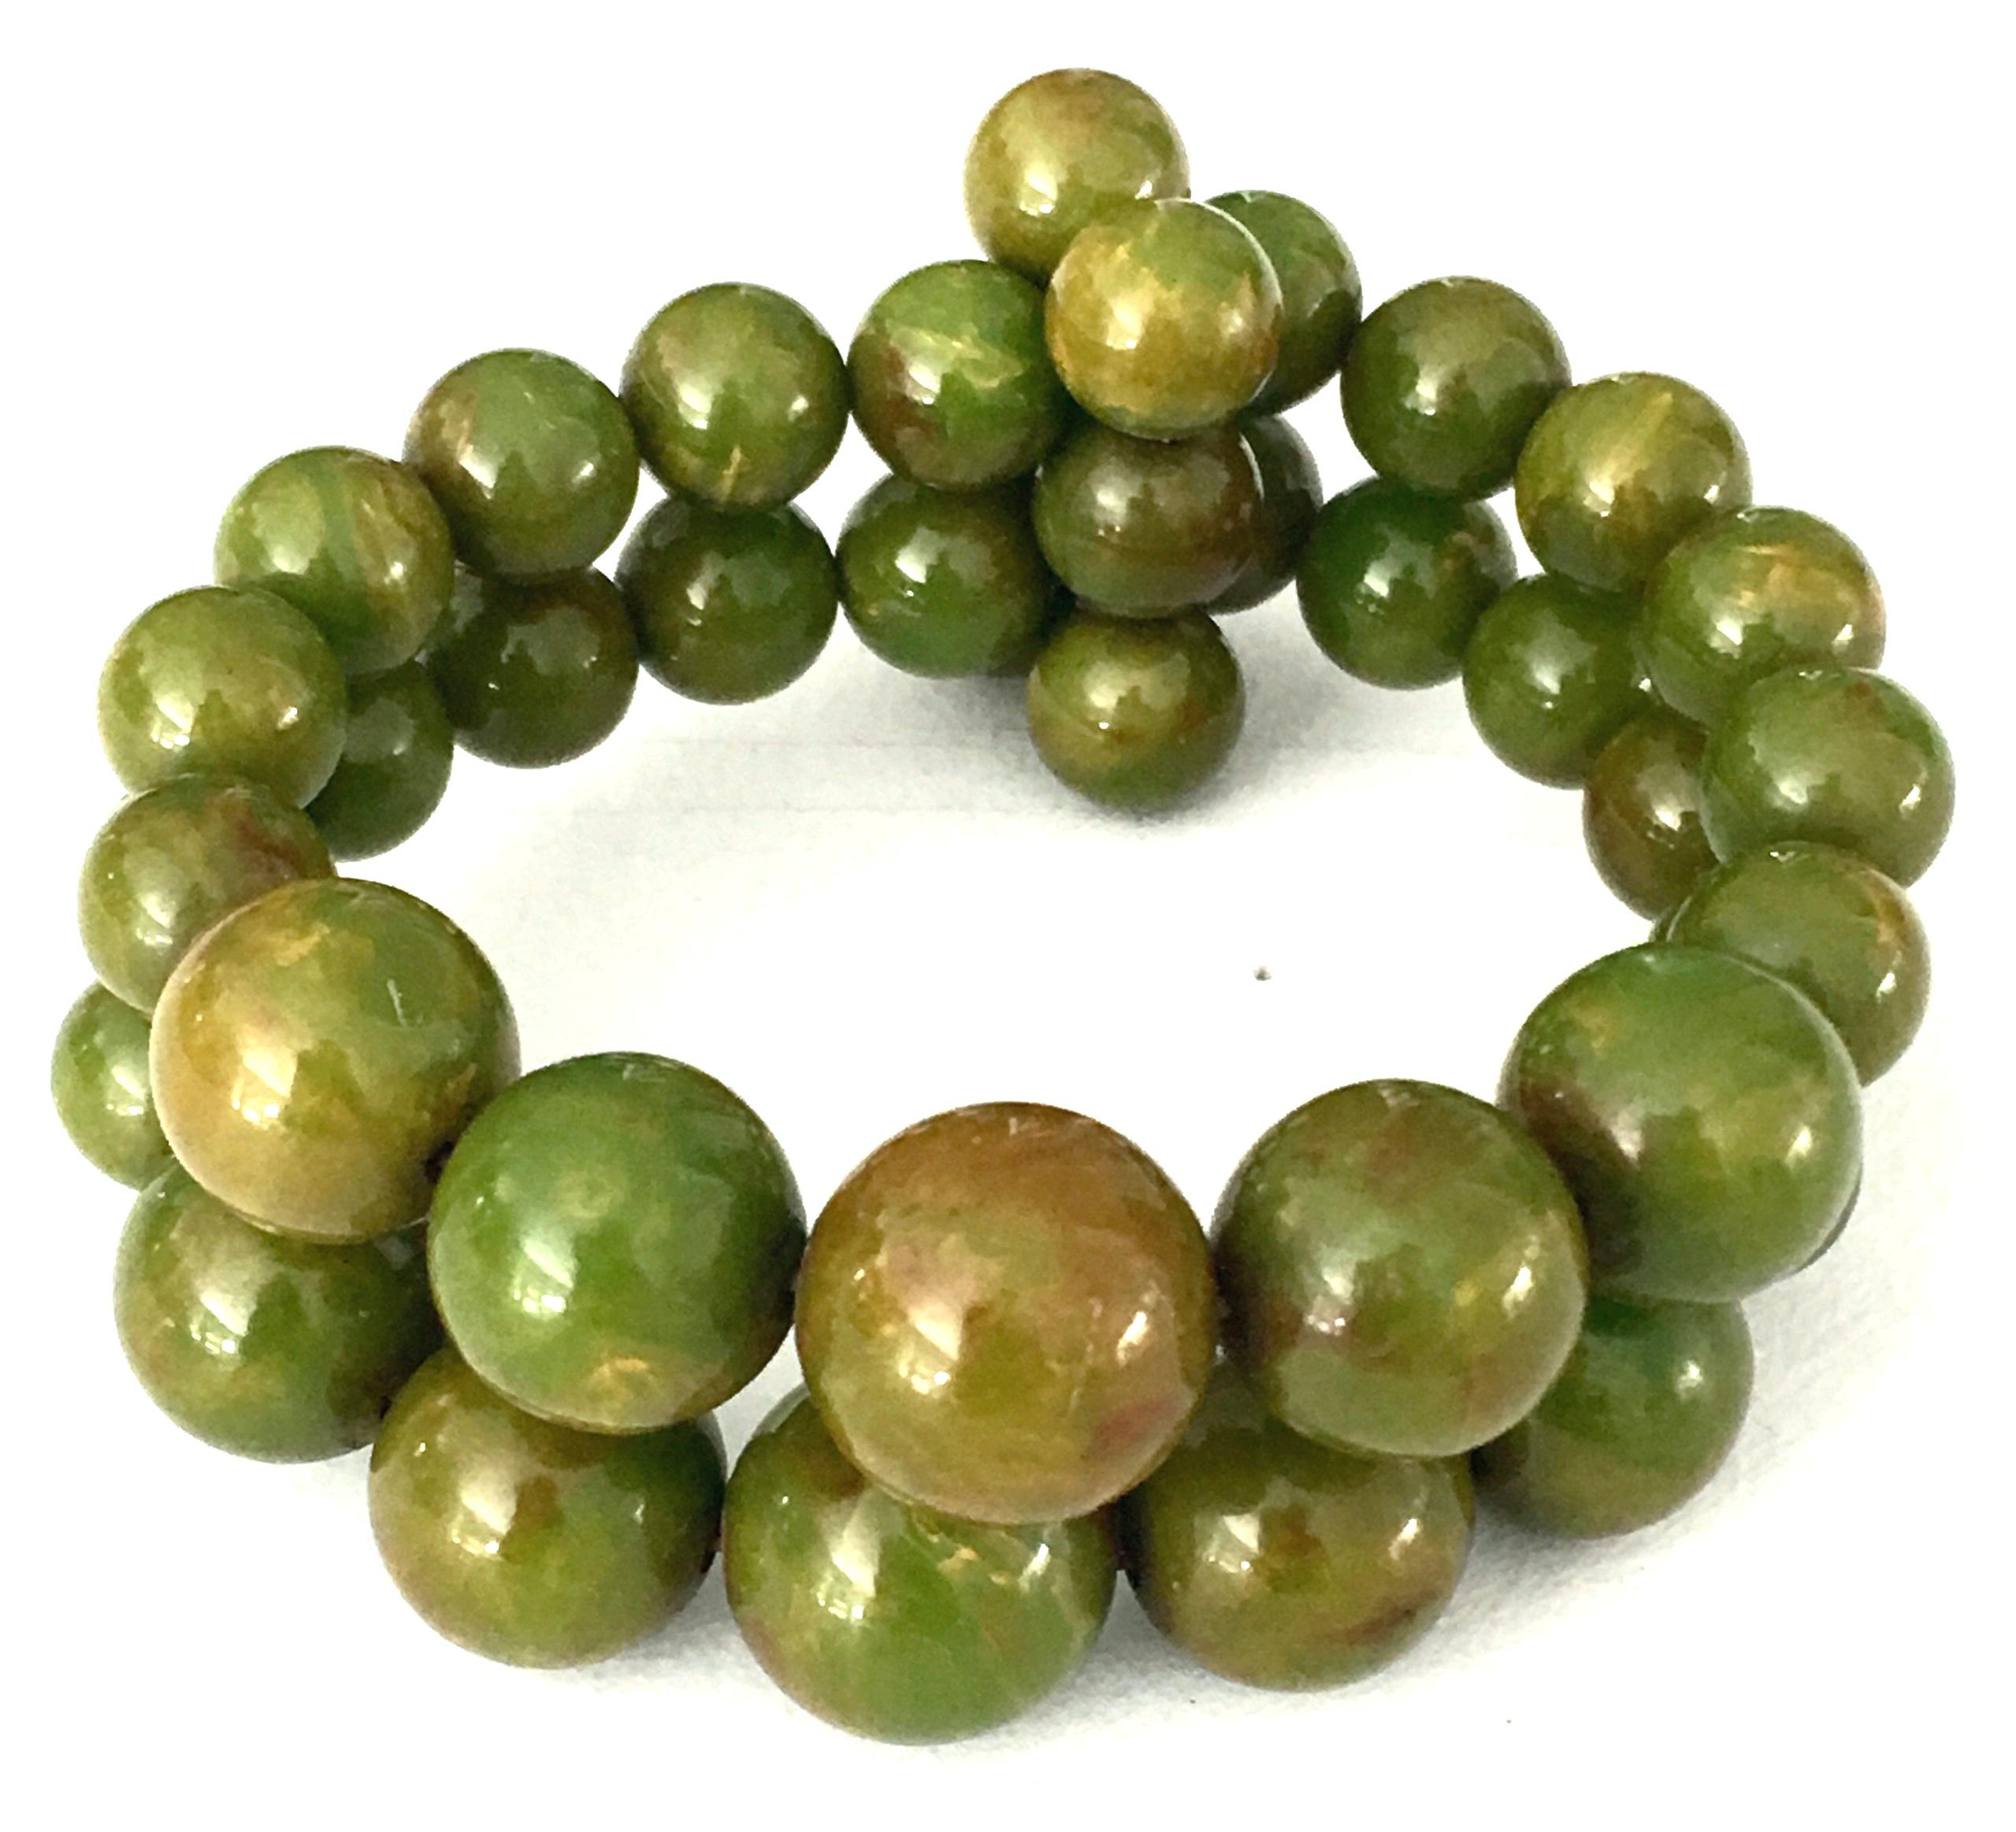 1930'S Bakelite graduated pea green round bead memory wire stretch bracelet. Two rows of graduating in size from 25